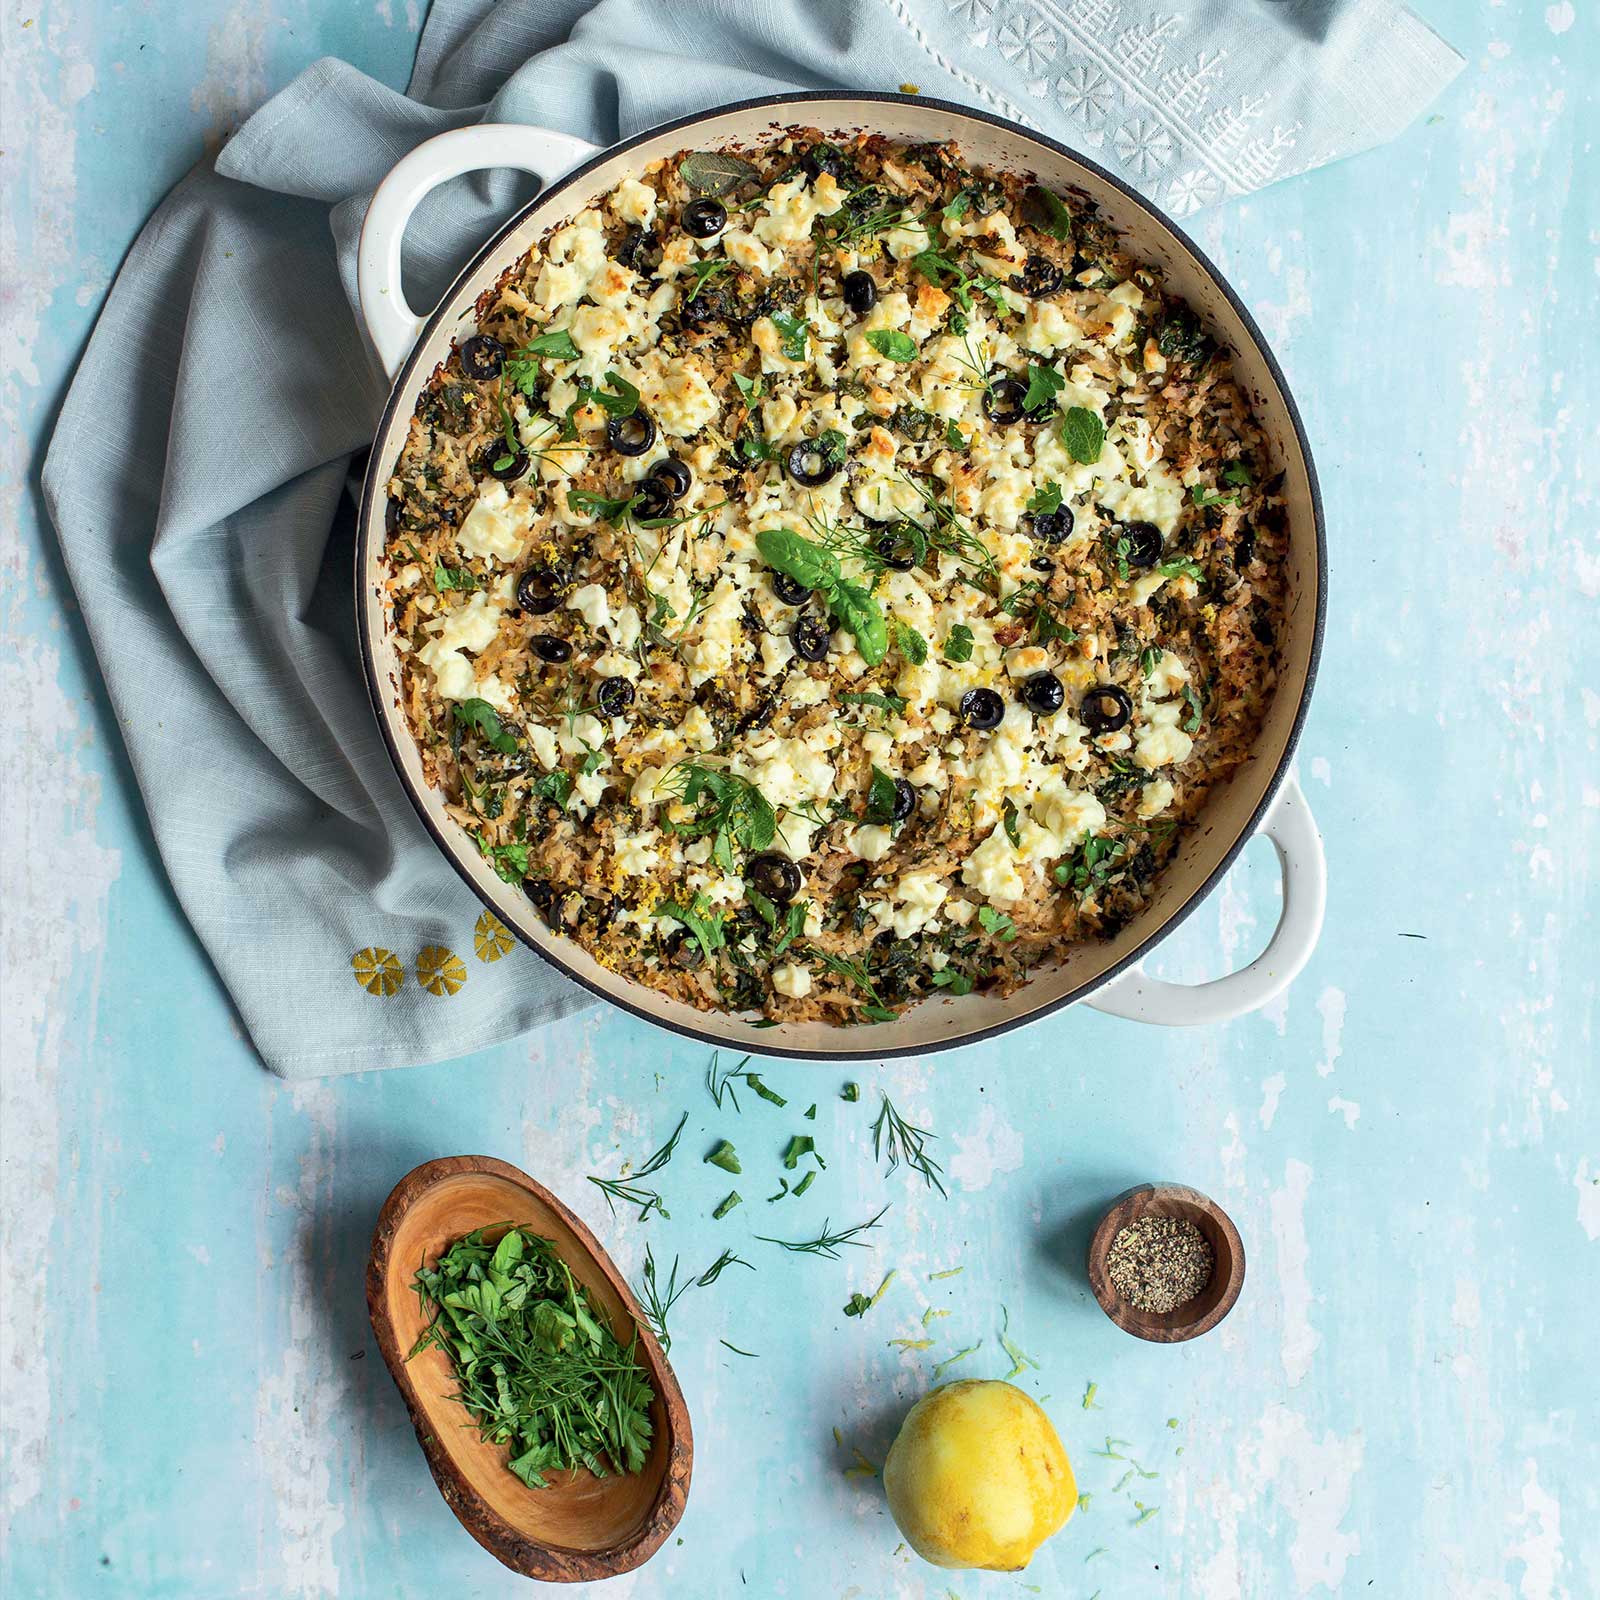 A recipe shot overhead. A white ceramic baking dish is filled with spanakorizo made from cauliflower instead of rice. Lots of fresh herbs, lemon and seasonings in the image.